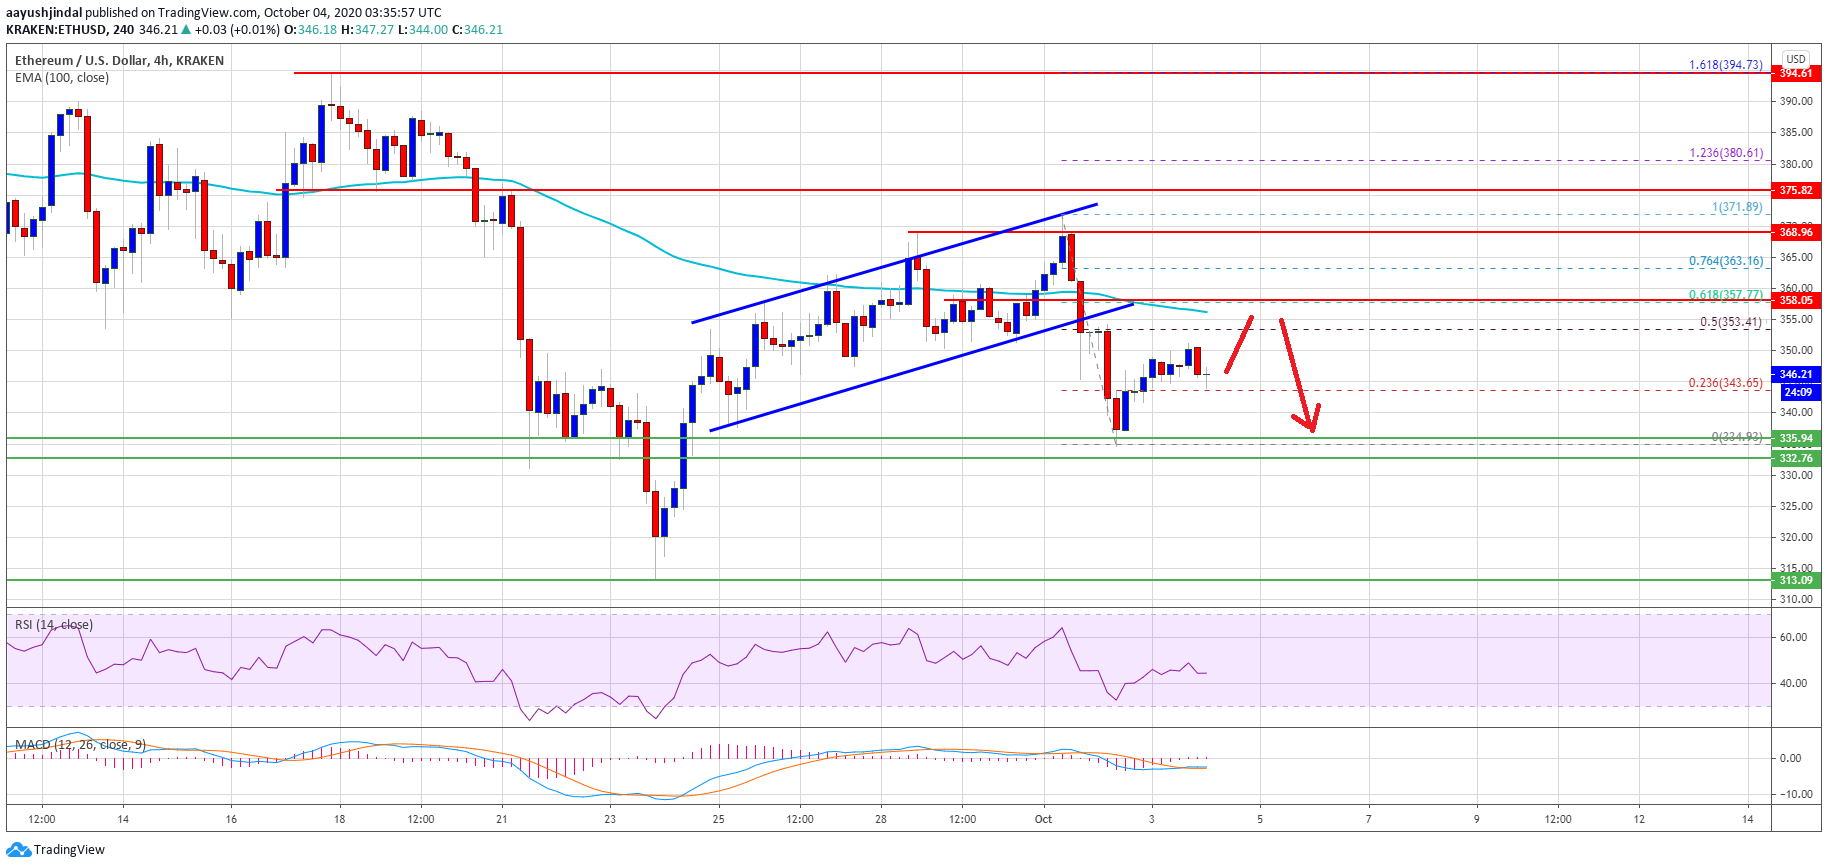 ethereum price action suggests a firm case for drop towards 310